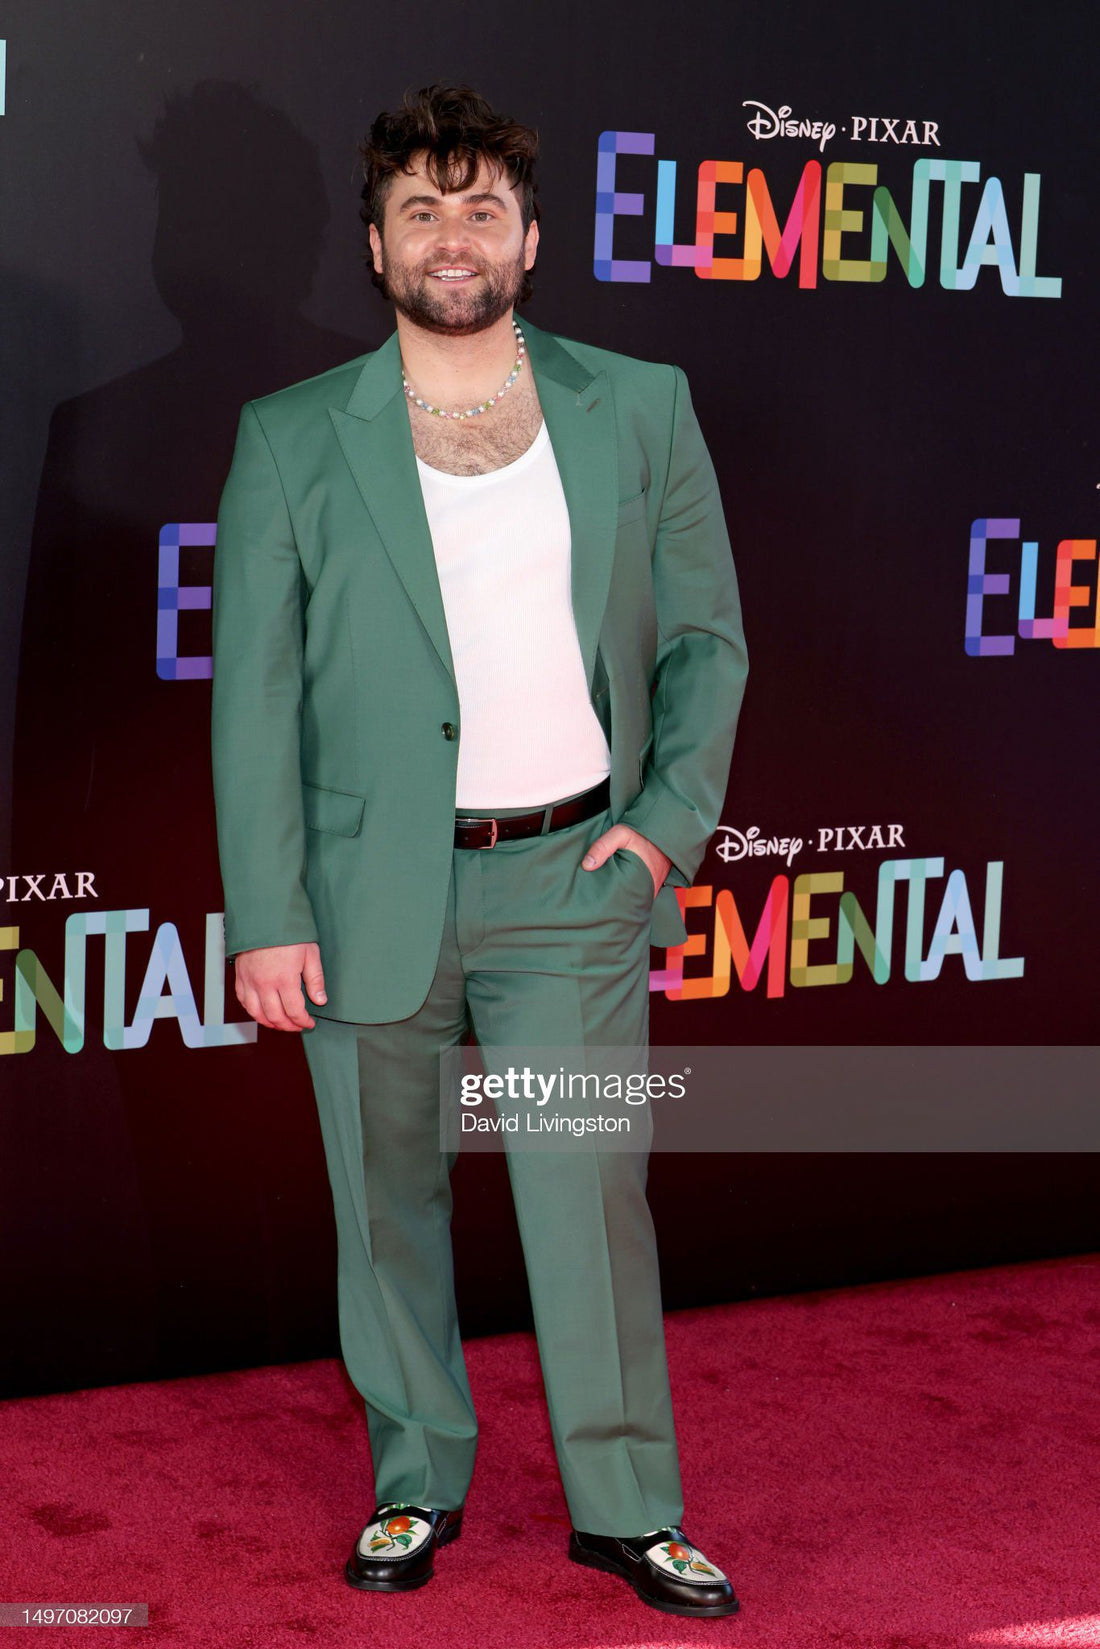 Jake Borelli Steals the Spotlight on the #RedCarpet in a Dapper Ron Tomson Suit at the Premiere of Pixar's Elemental